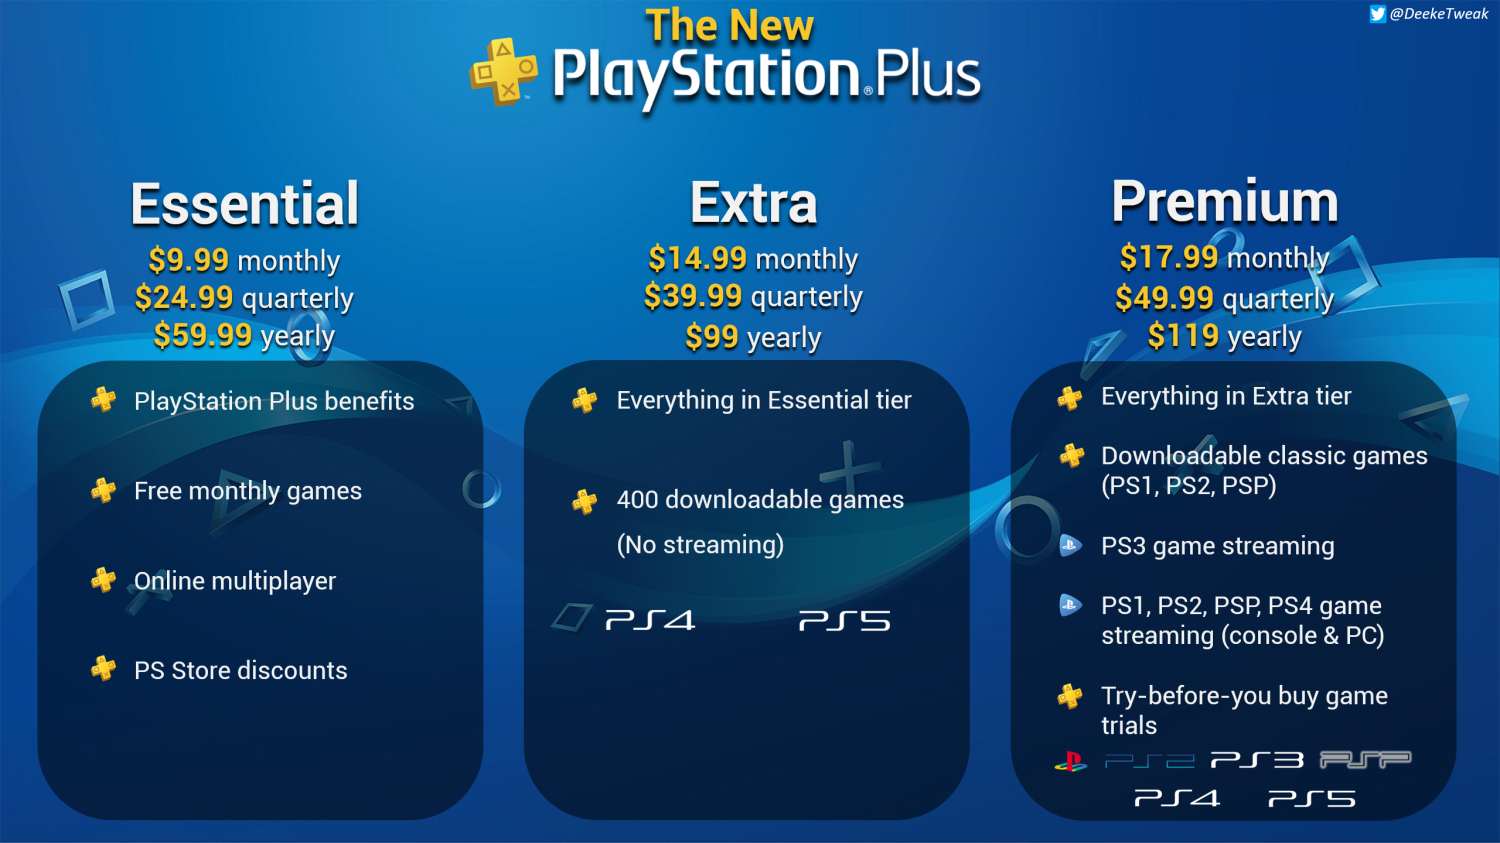 PlayStation Now to Add Support for Streaming 1080p Capable Games This Week